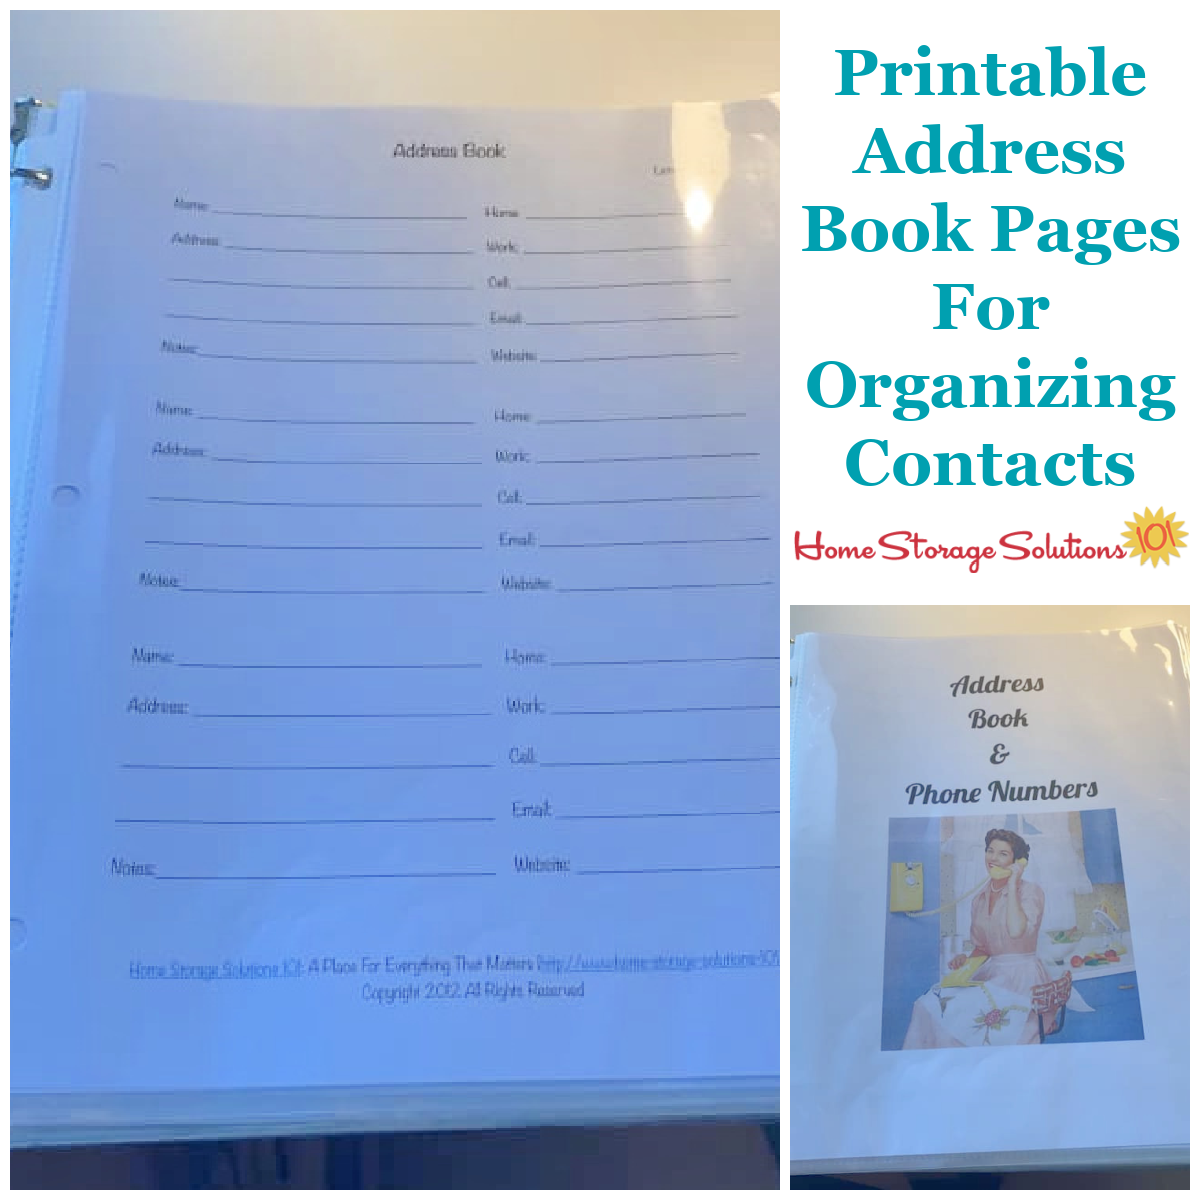 Printable address book pages for organizing contacts {courtesy of Home Storage Solutions 101}